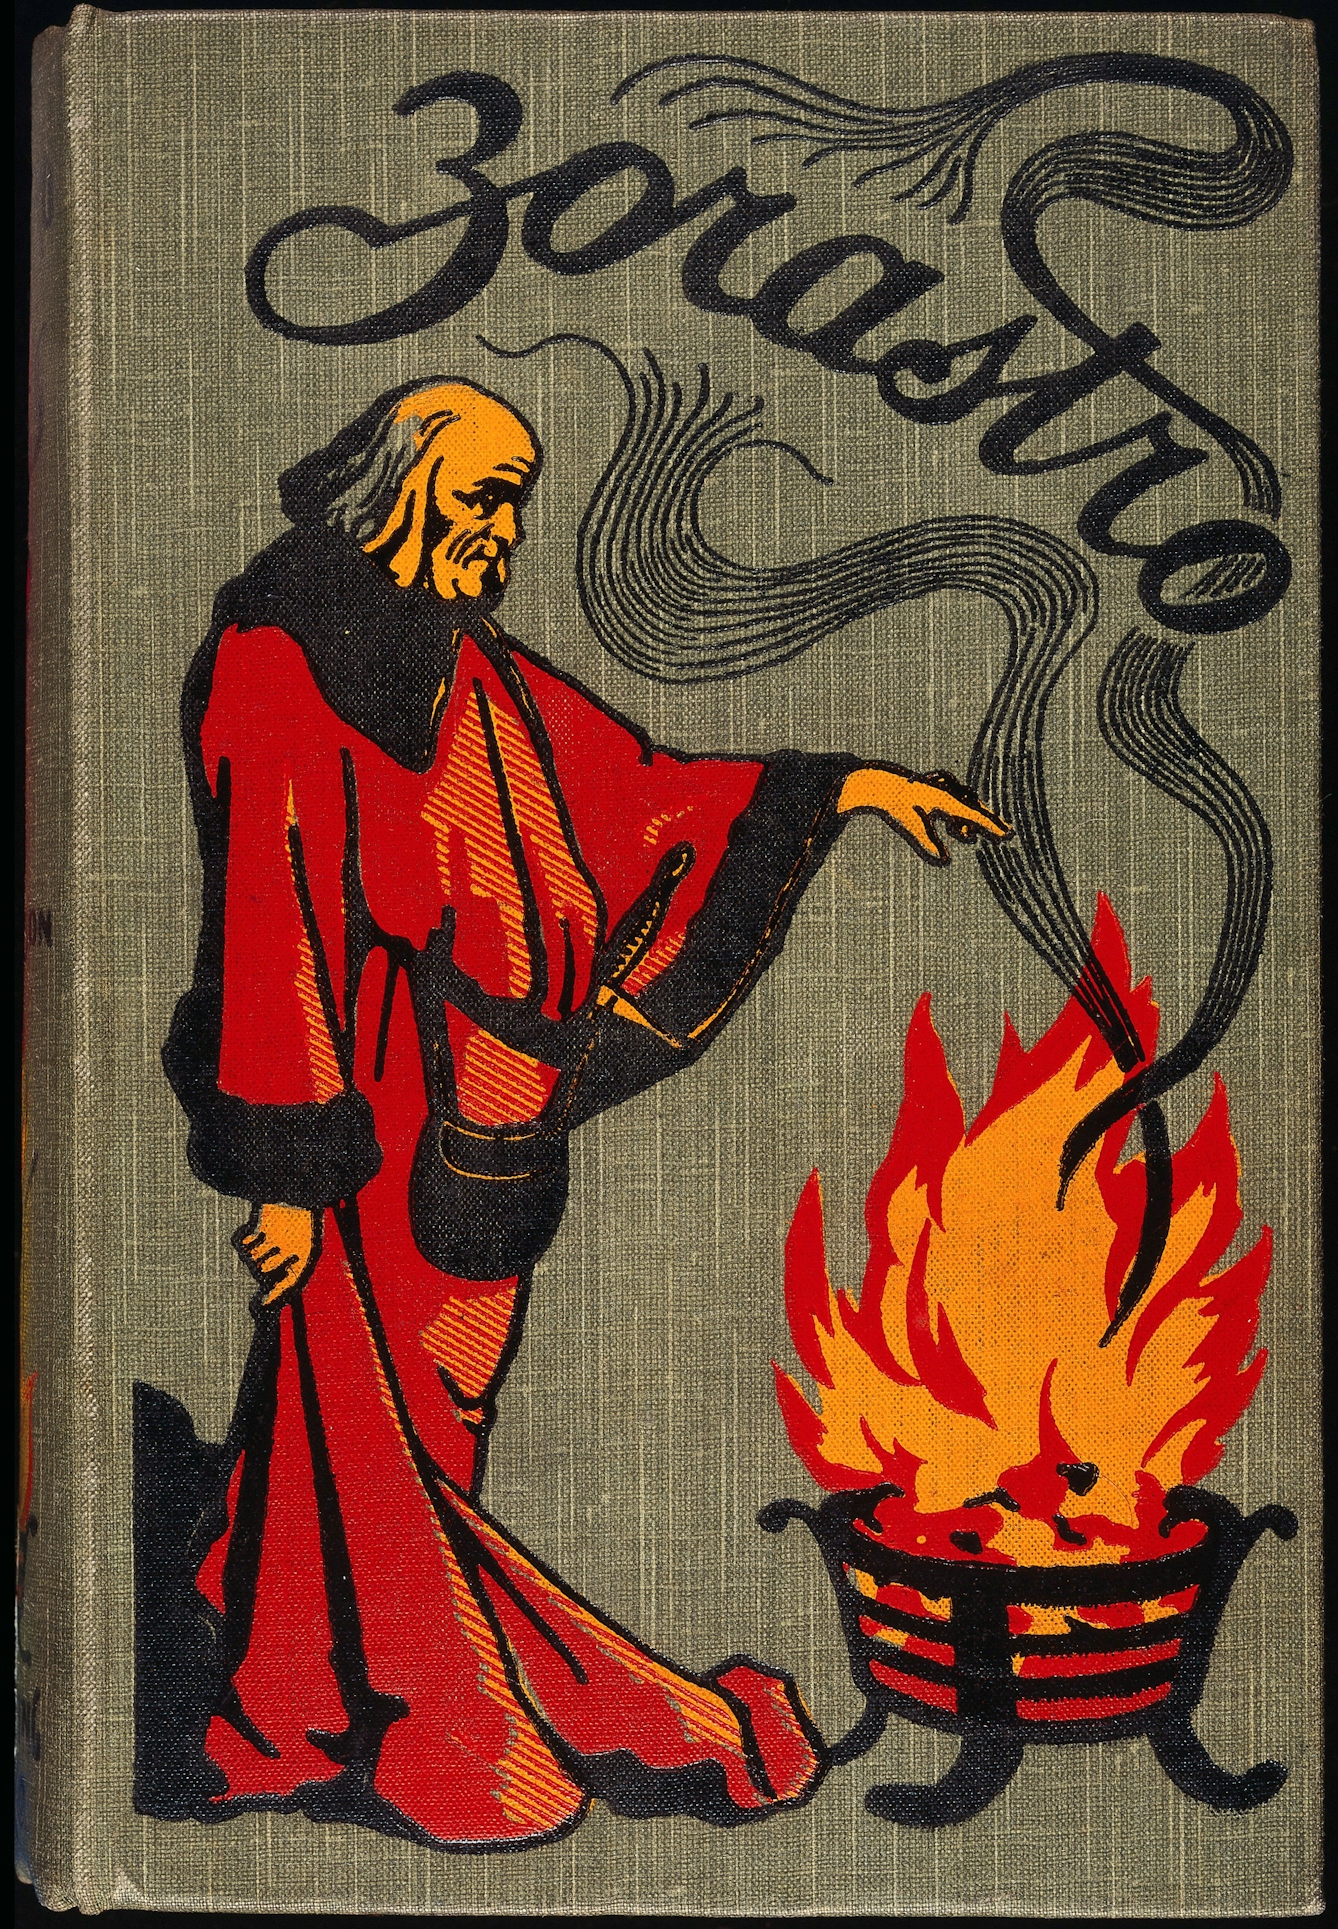 Front cover of a book showing a man in a red cloak beside a cauldron.